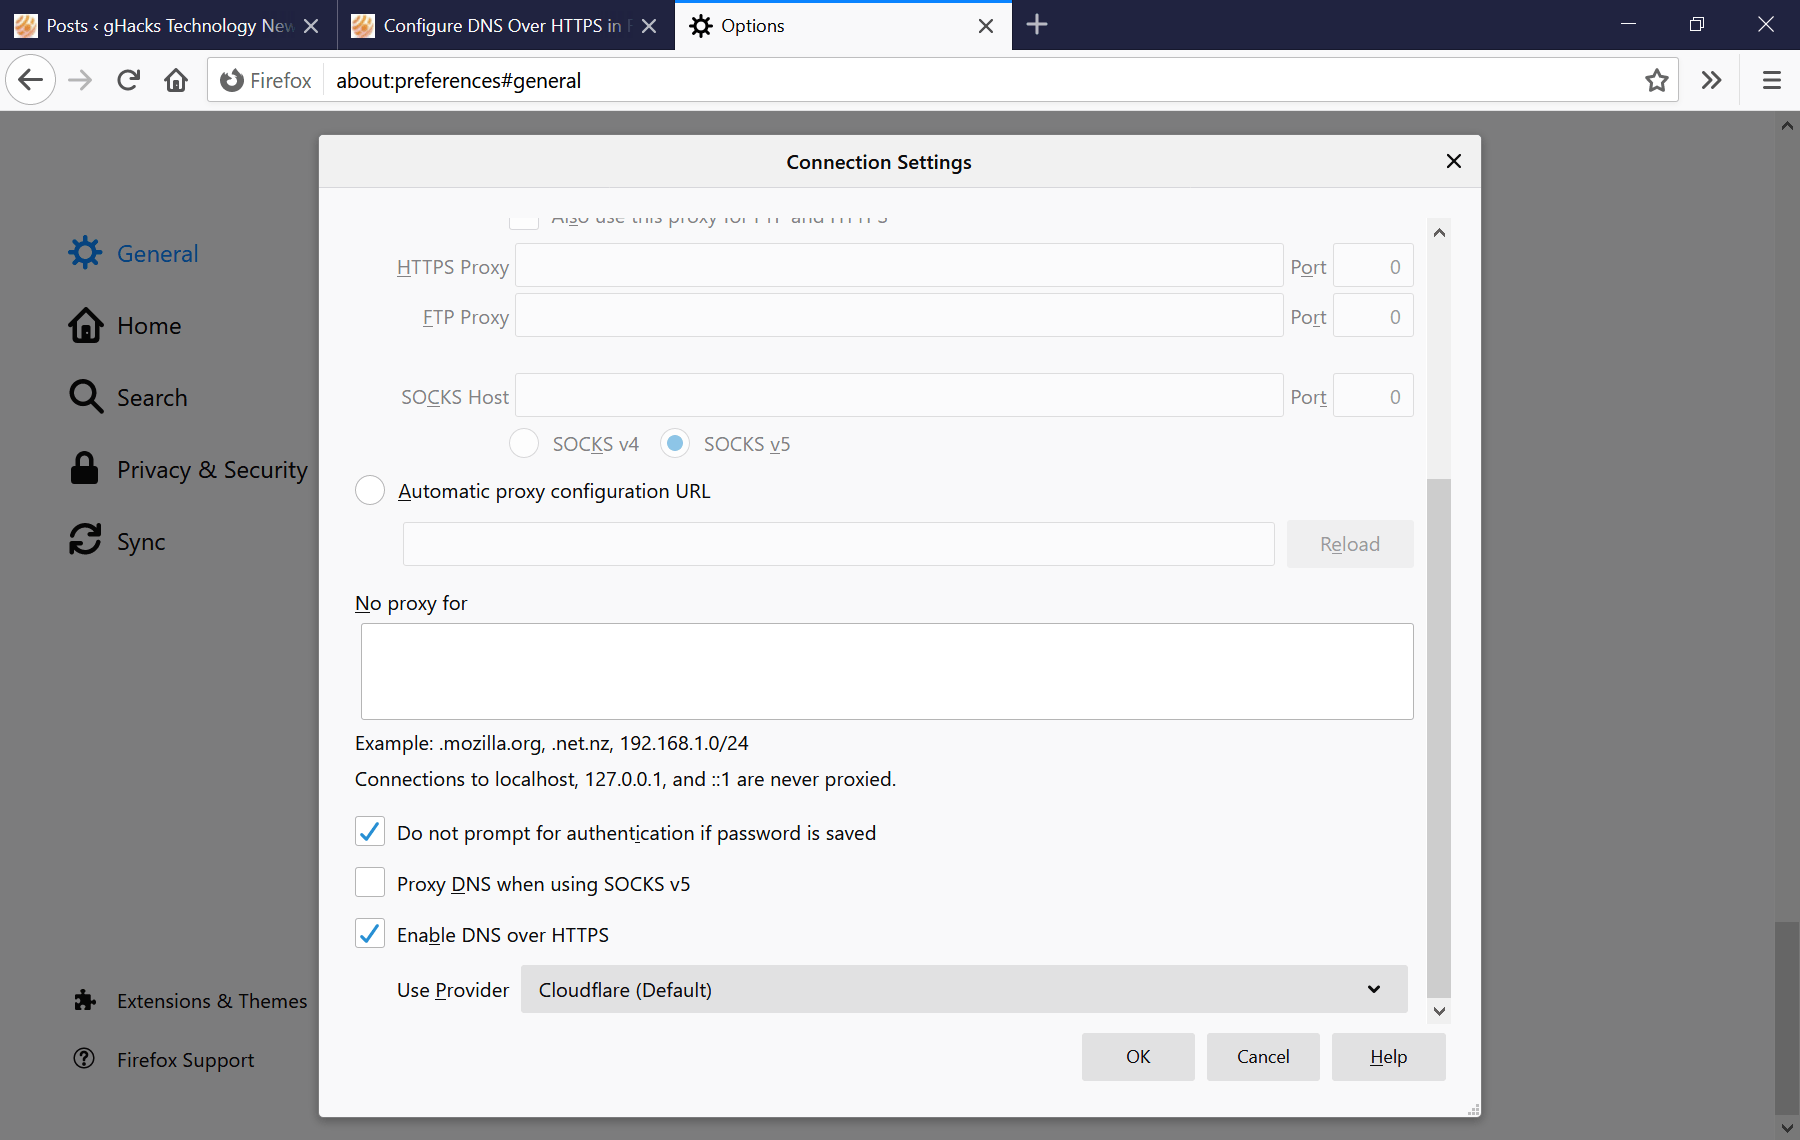 firefox dns over https us rollout